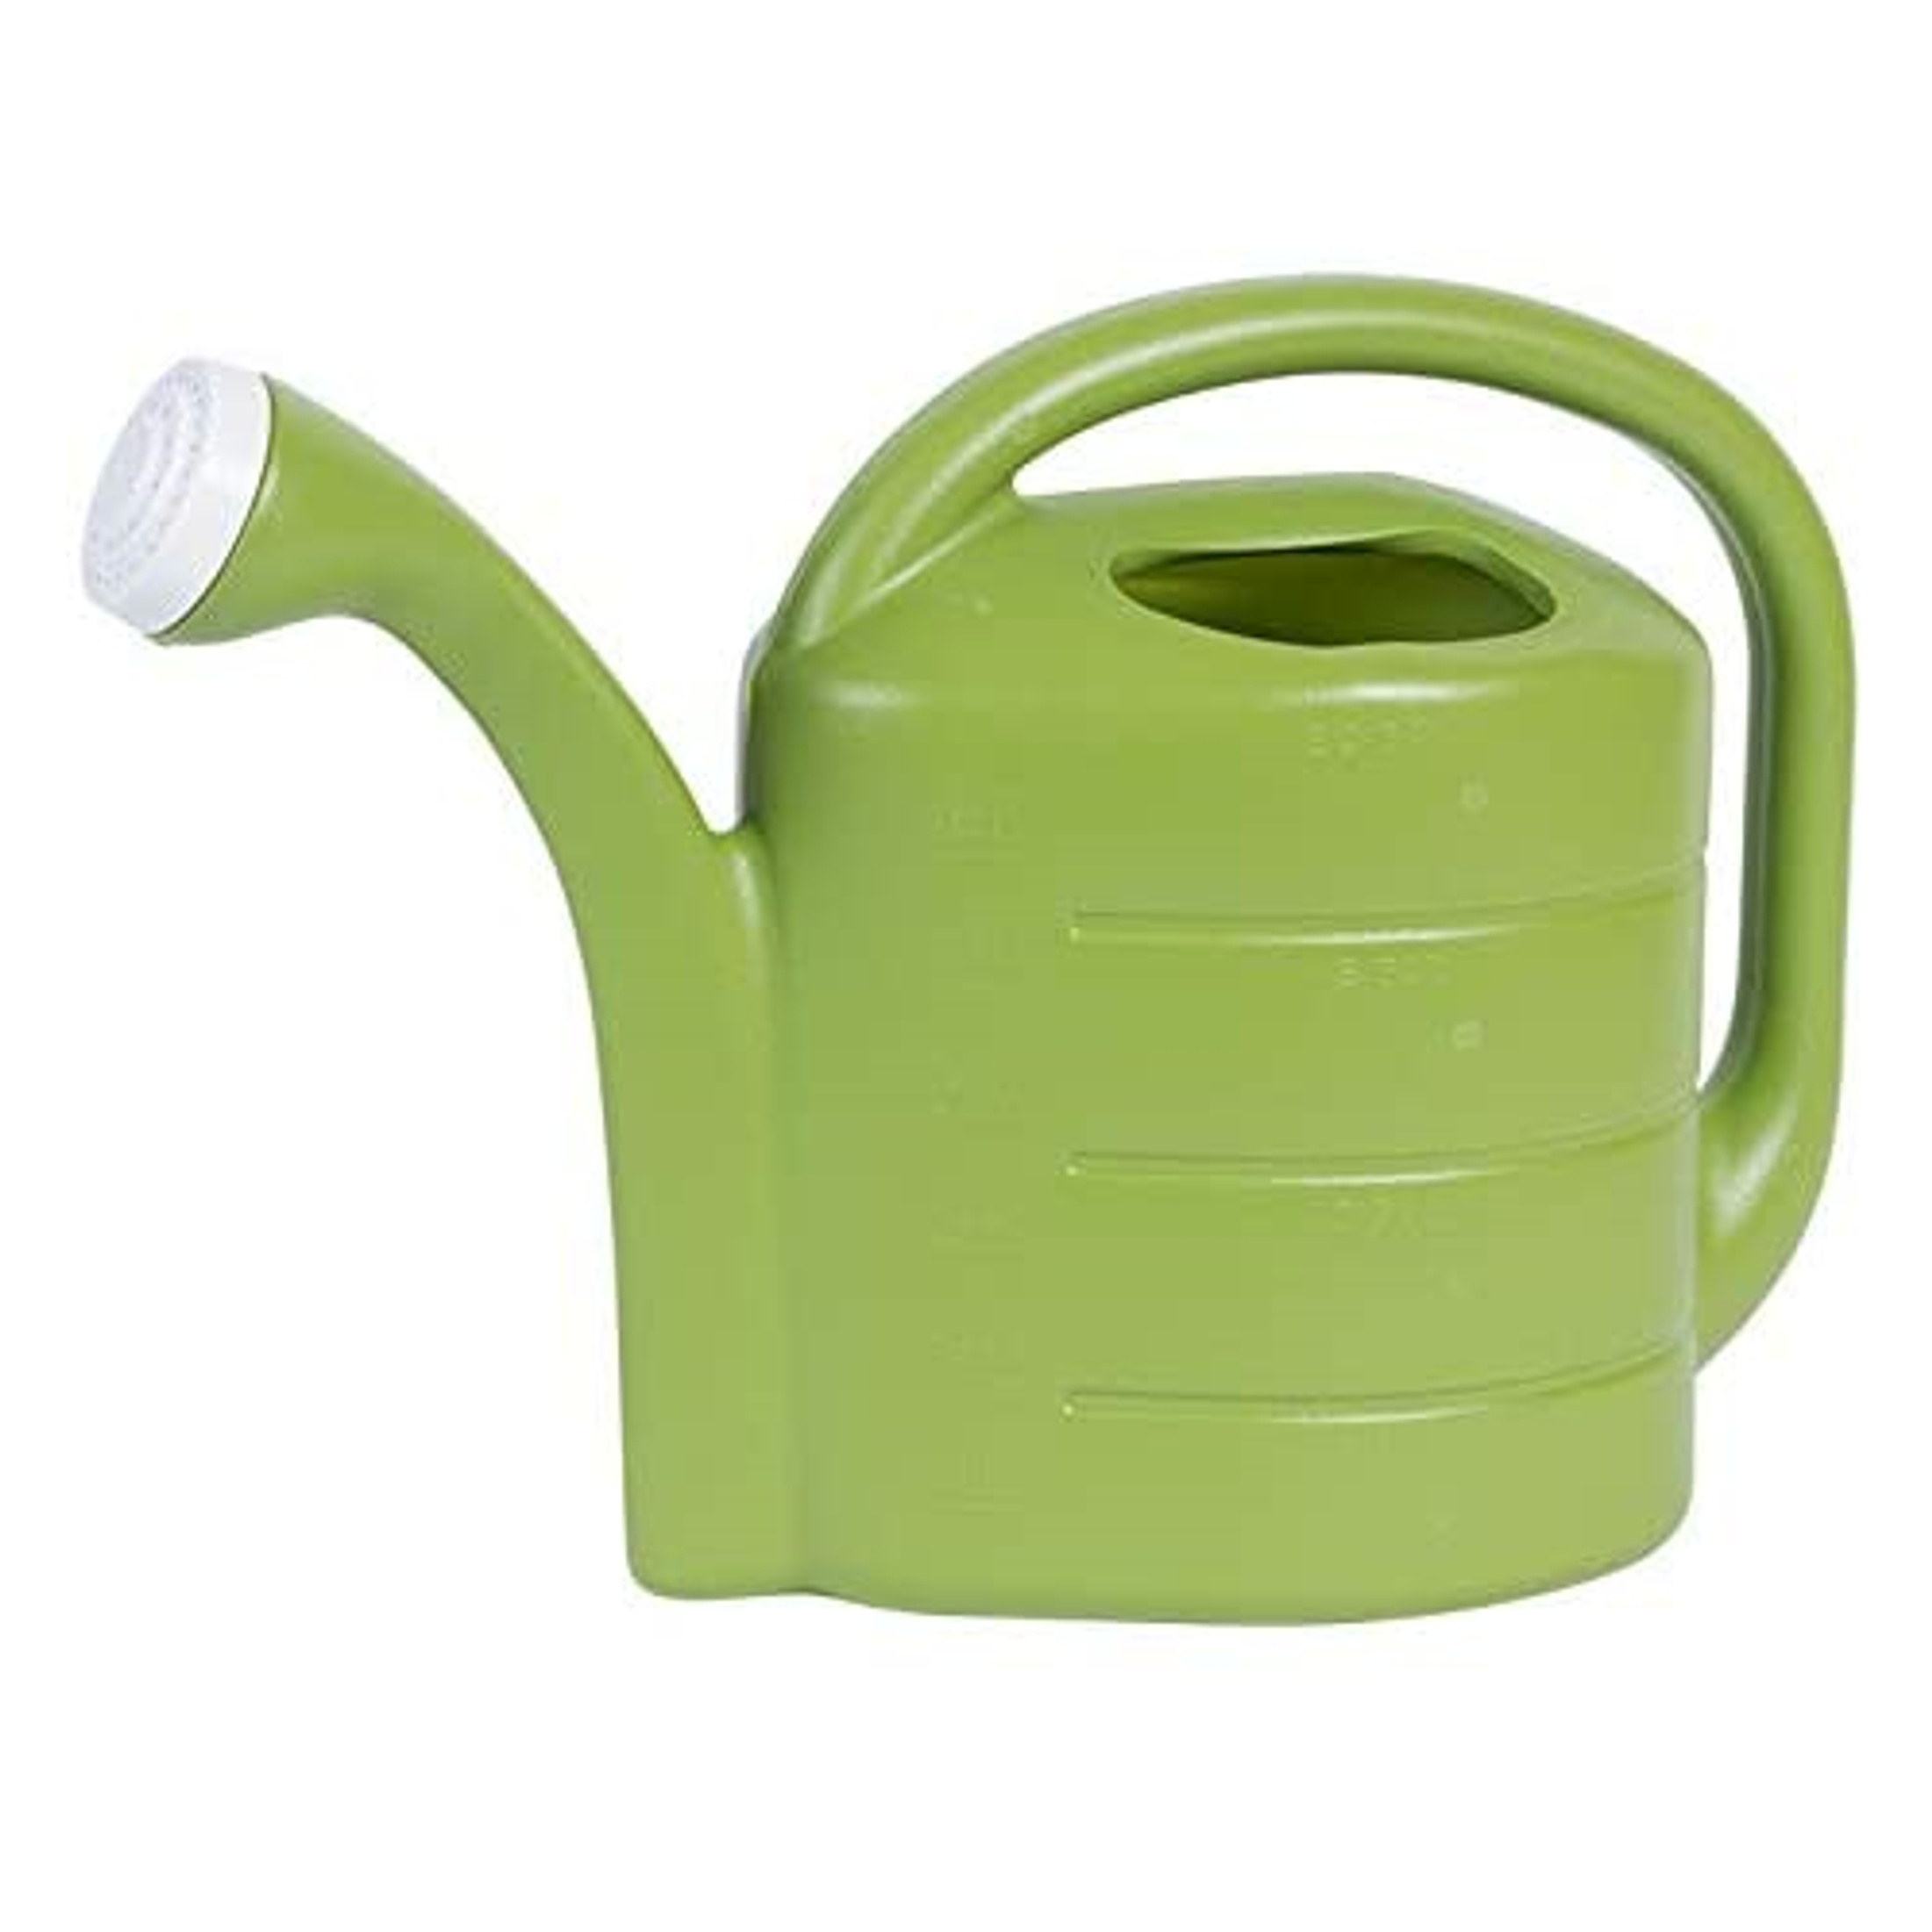 Novelty 30413 2 Gallon Deluxe Watering Can, Green